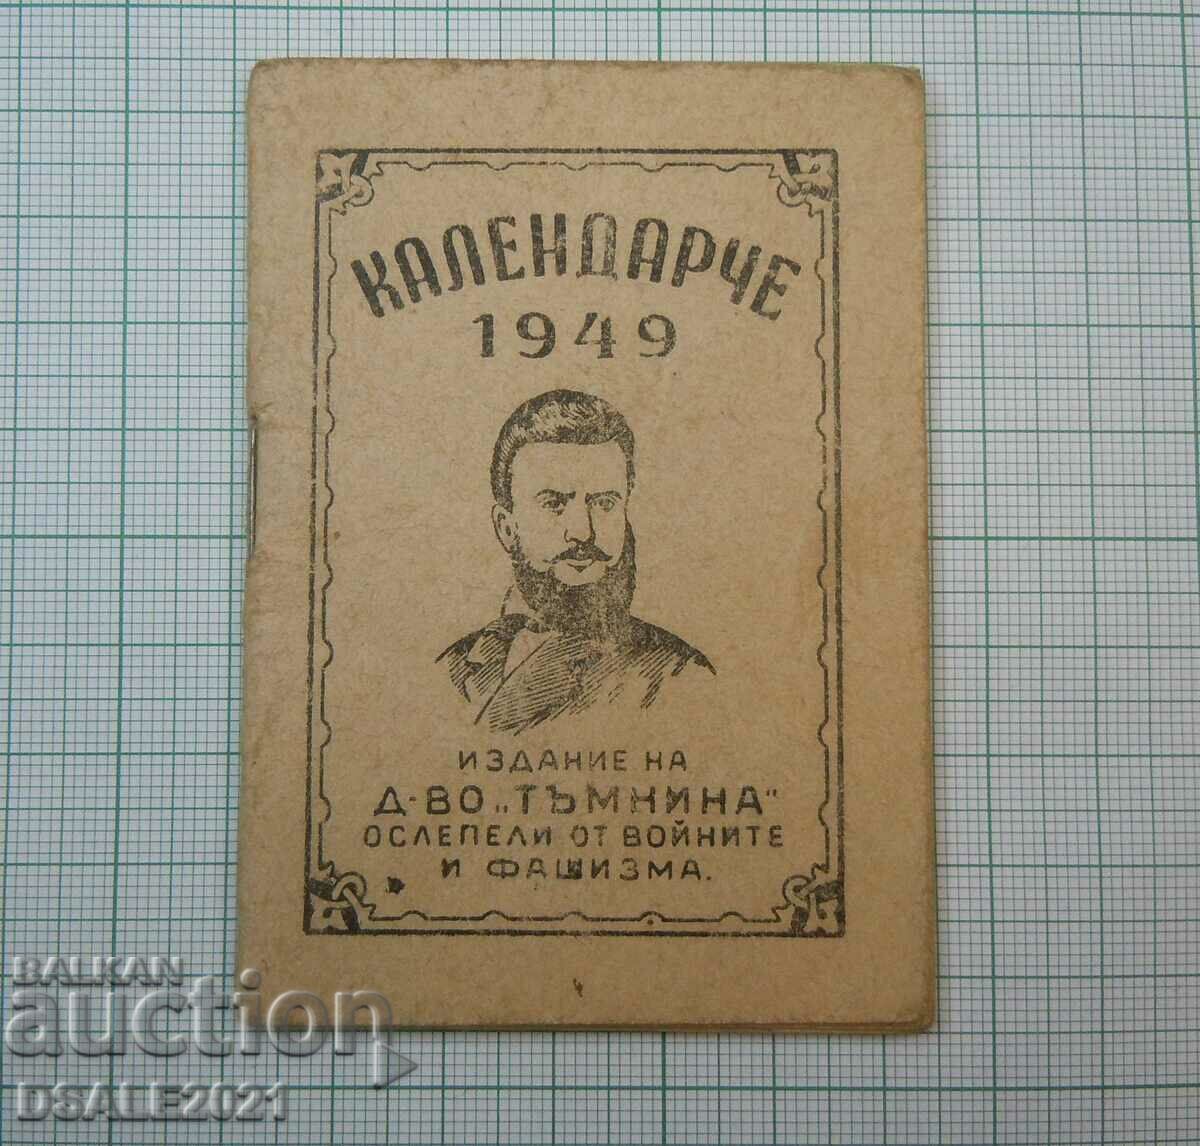 Hristo Botev 1949 calendar blinded by the wars 6.2x8.7cm.